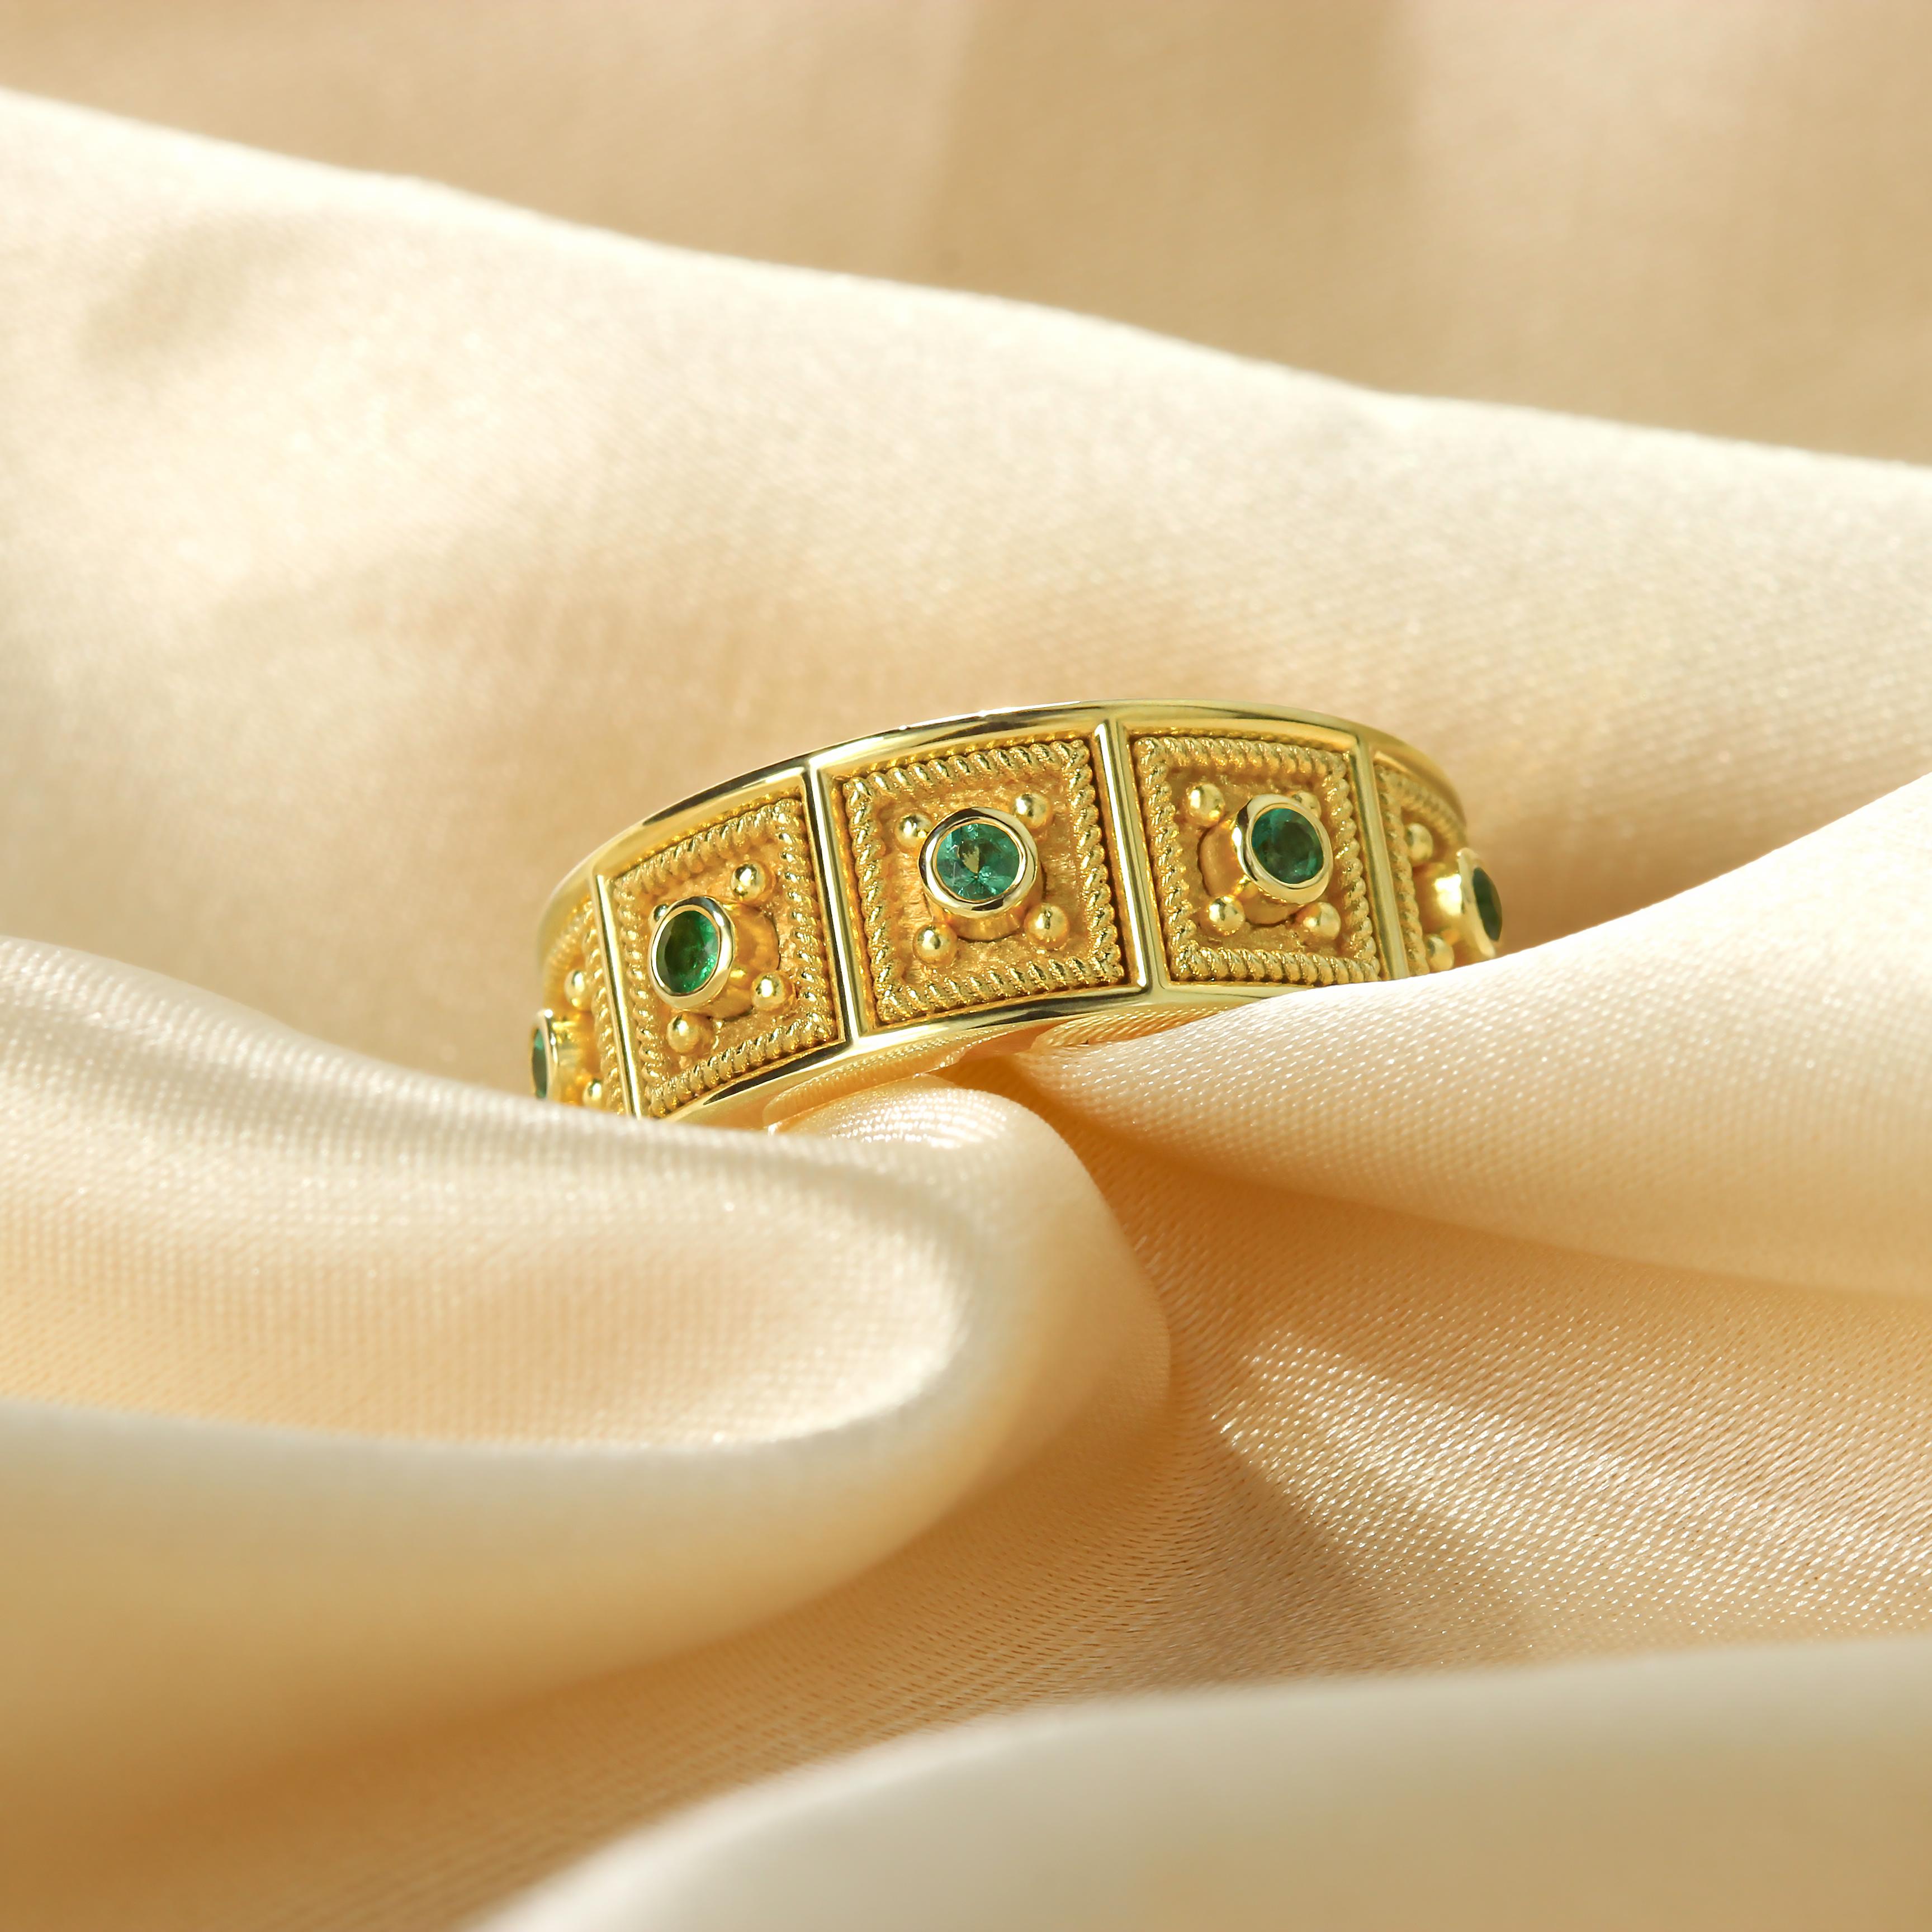 Step into the grandeur of Byzantine opulence with our captivating square gold ring adorned with radiant emeralds. Crafted meticulously in the style of Byzantine artistry, this band ring features a mesmerizing array of twisted gold squares, each